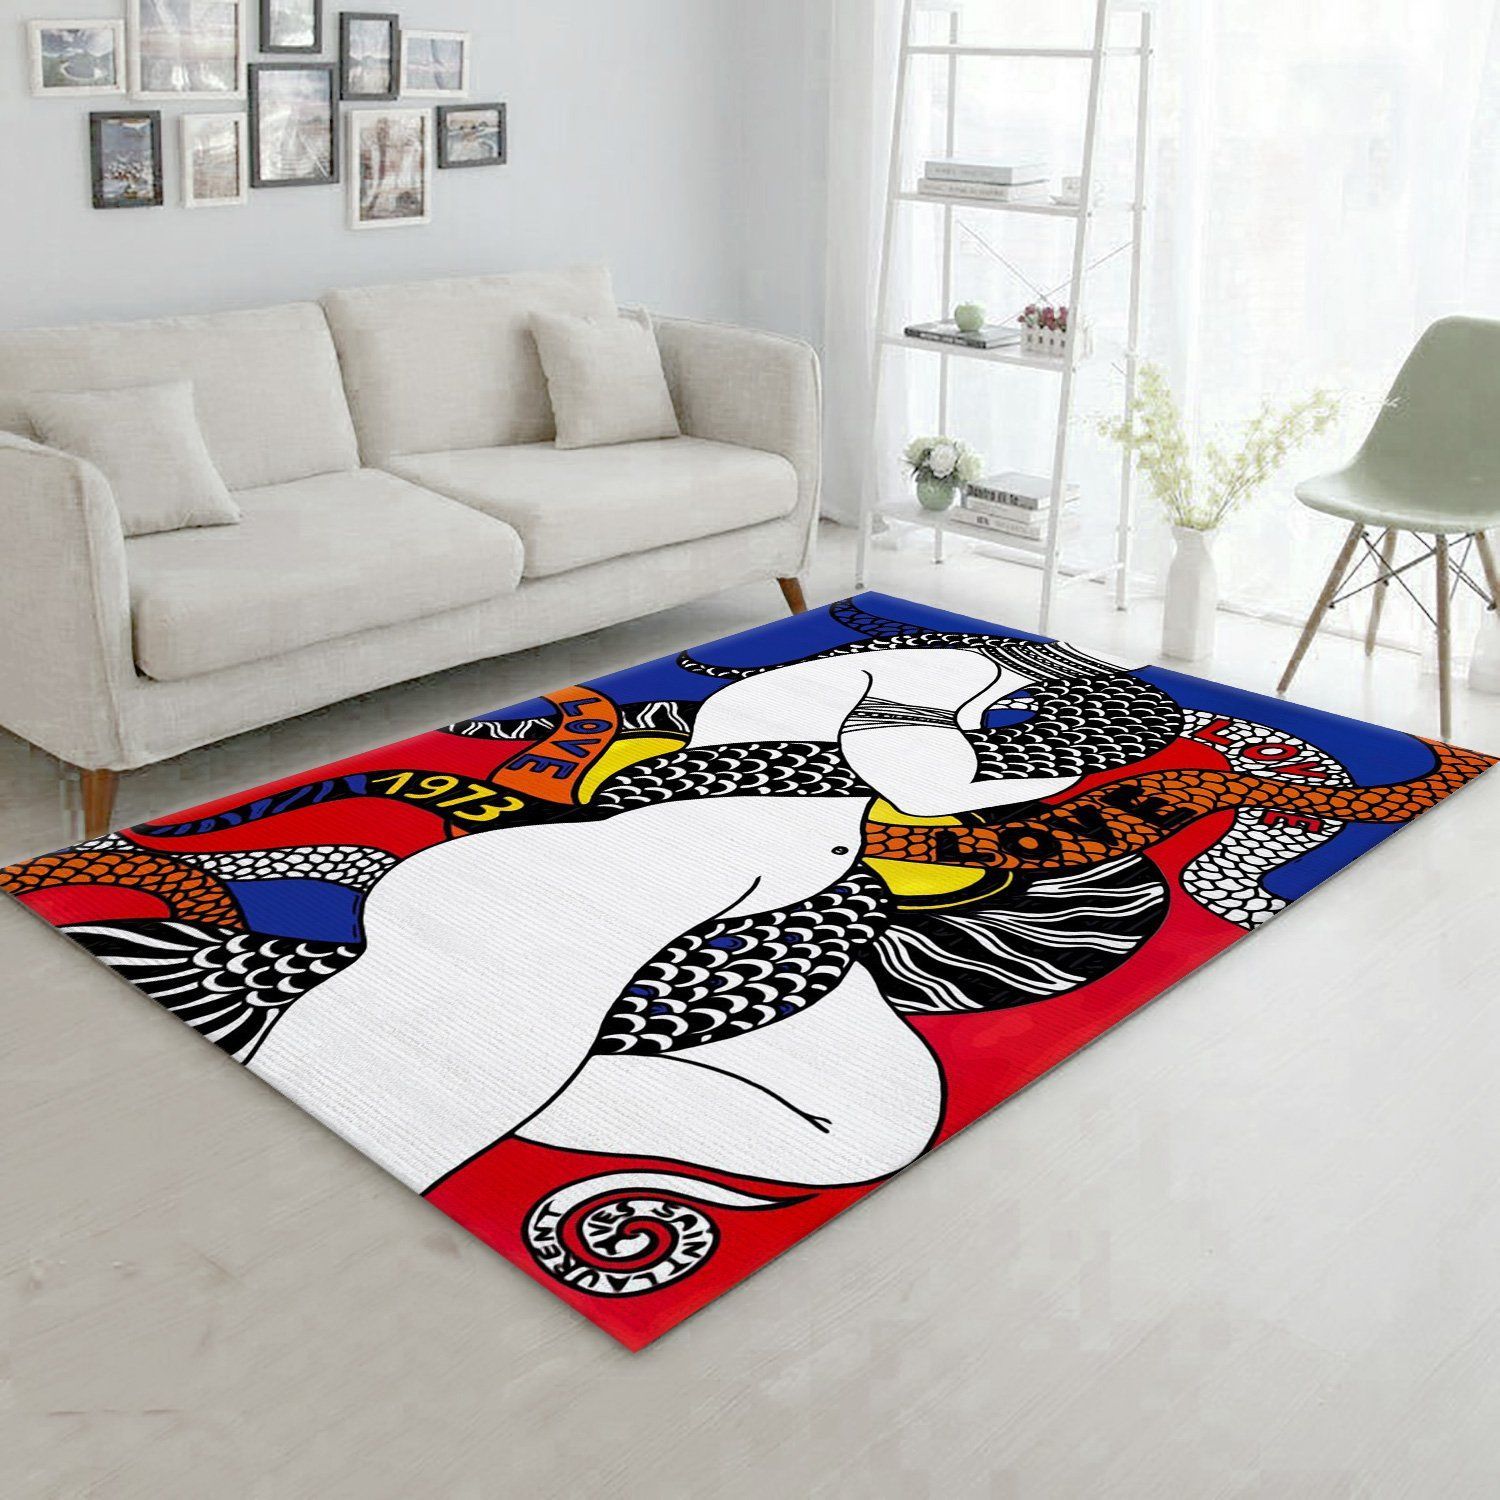 Ysl Vintage Love Poster Area Rugs Living Room Rug Christmas Gift US Decor - Indoor Outdoor Rugs 2